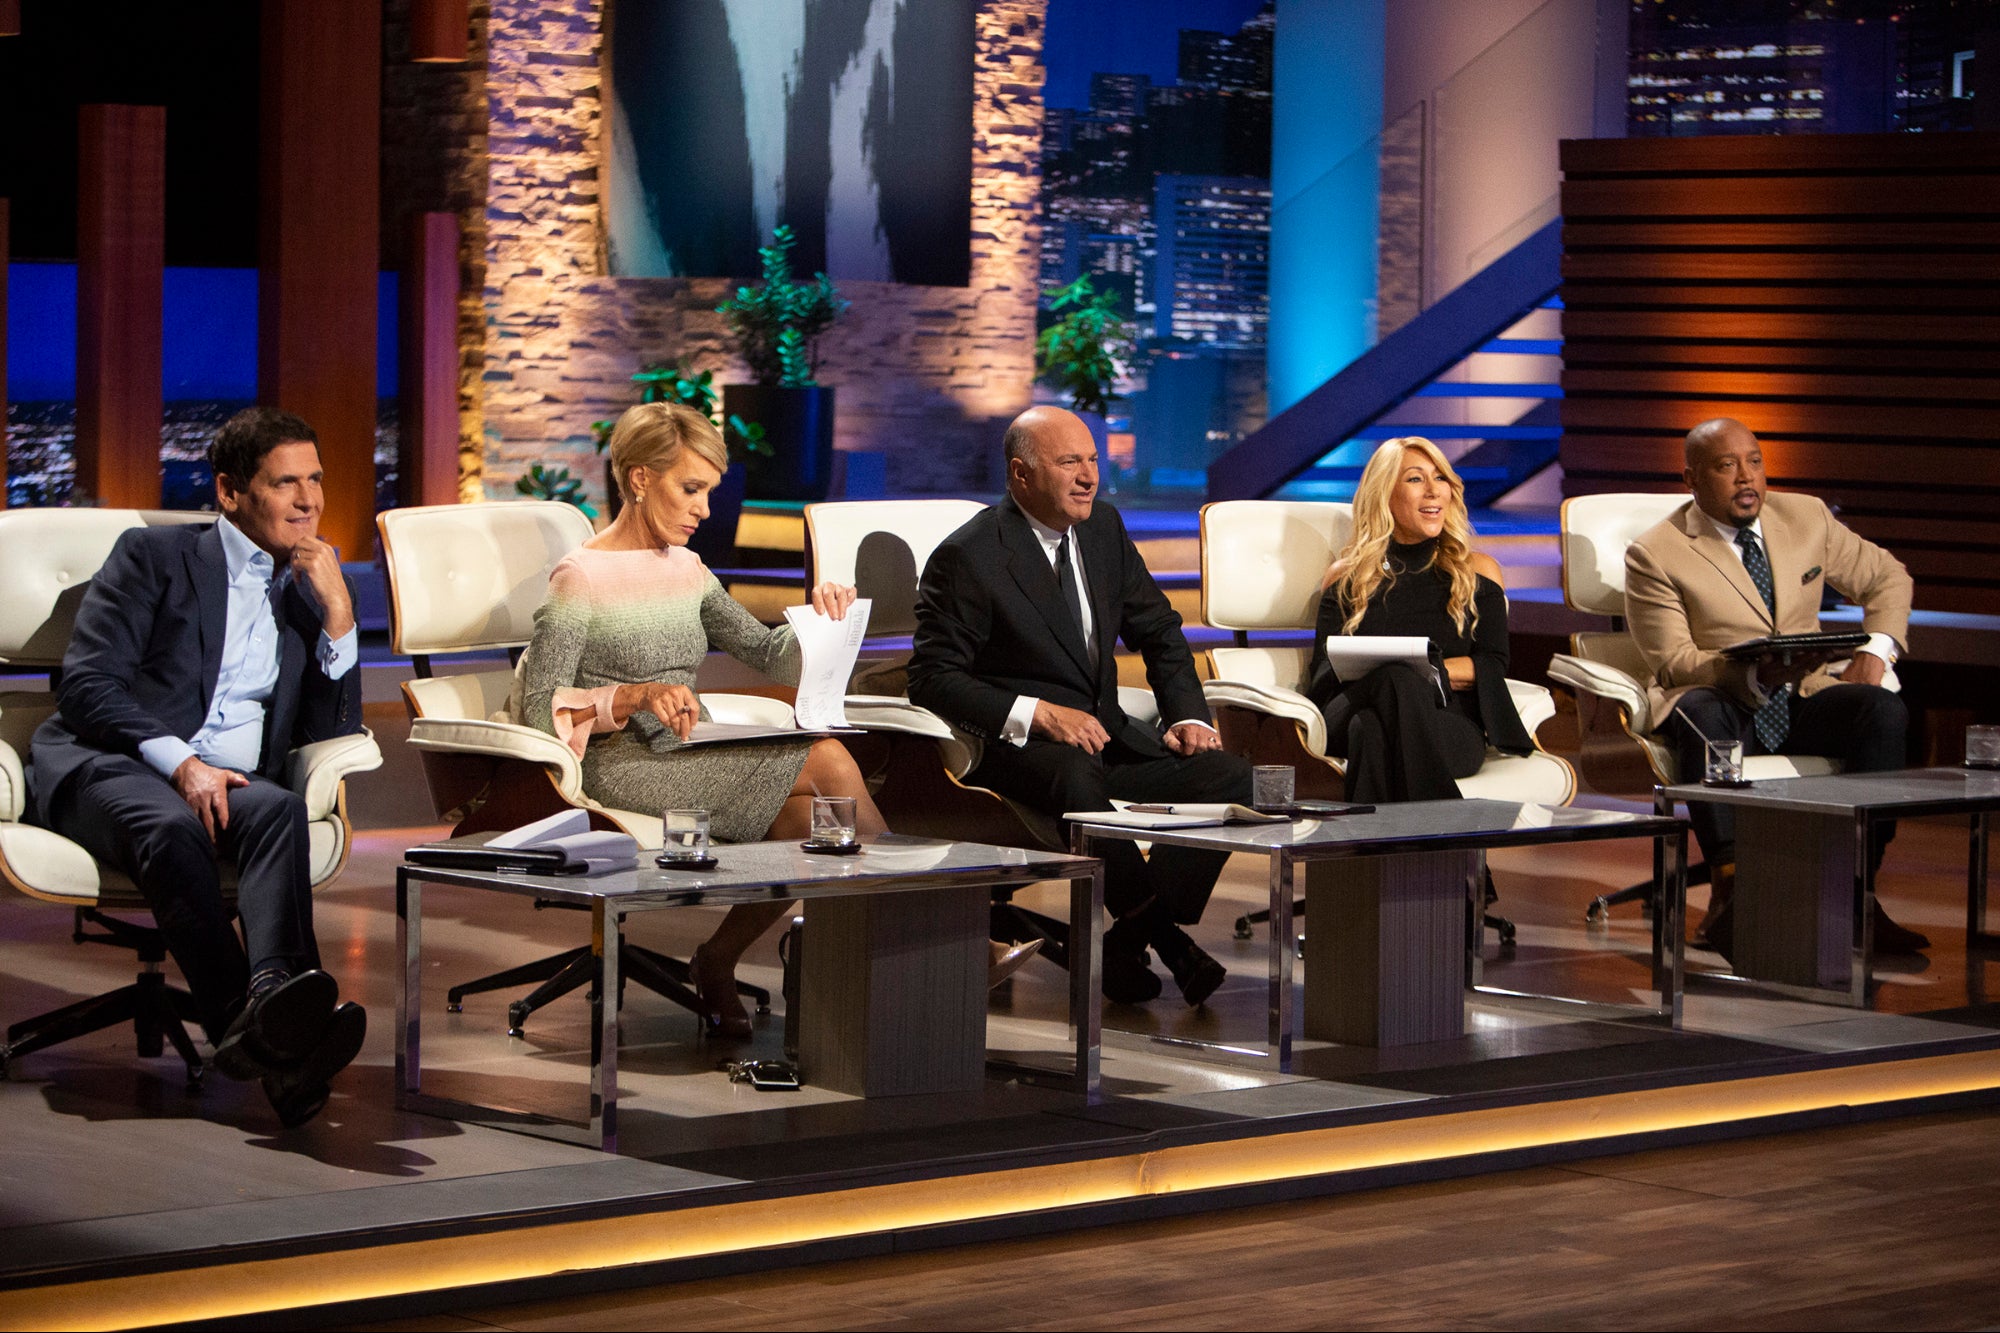 Painful Lessons for Getting an Investment Deal on 'Shark Tank'